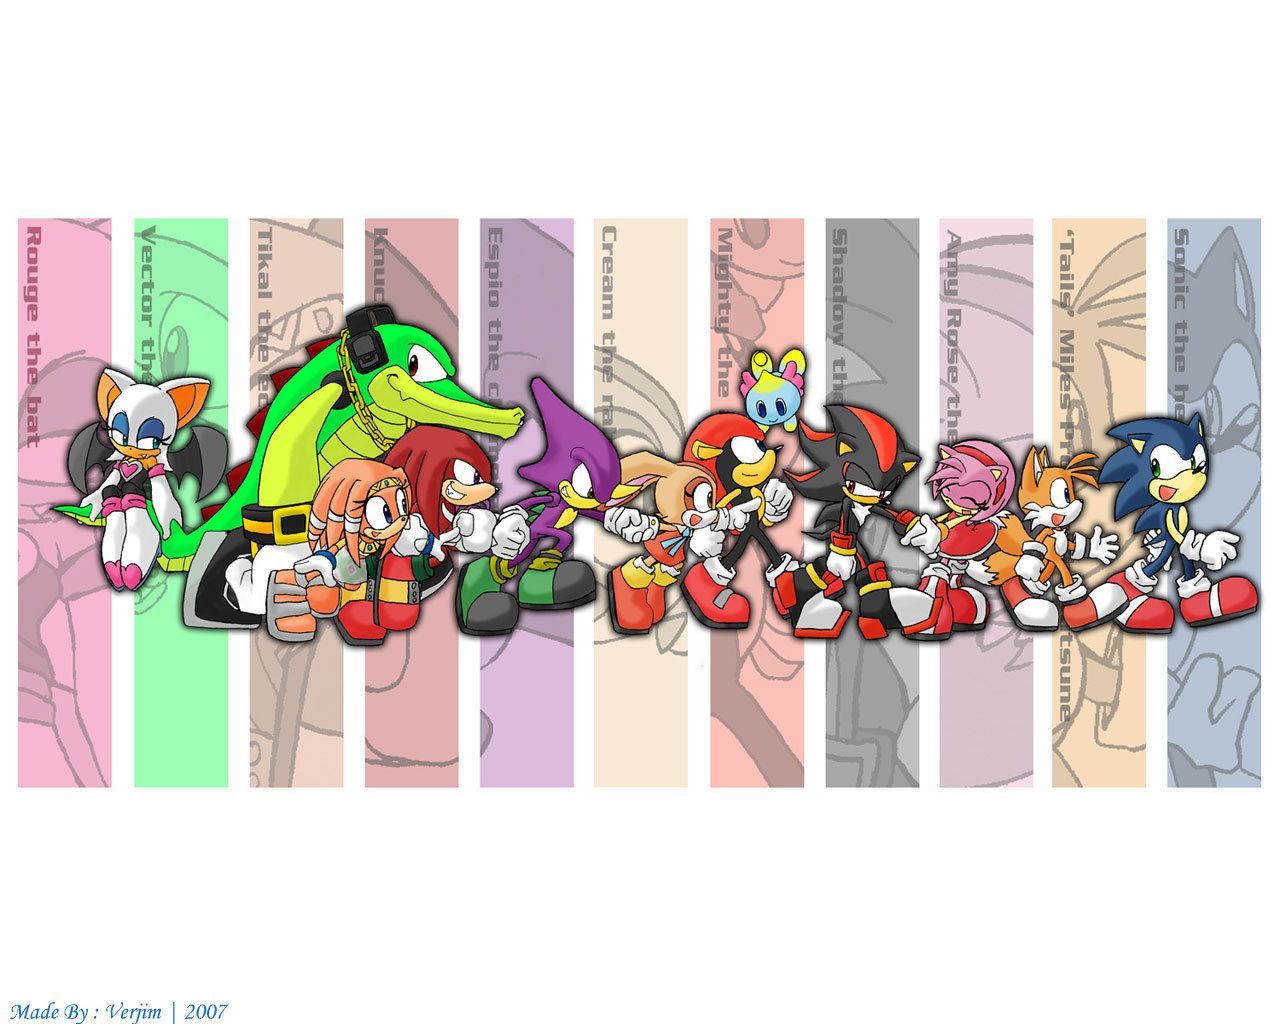 Sonic Characters Wallpaper: sonic characters. Character wallpaper, Sonic, Sonic fan art